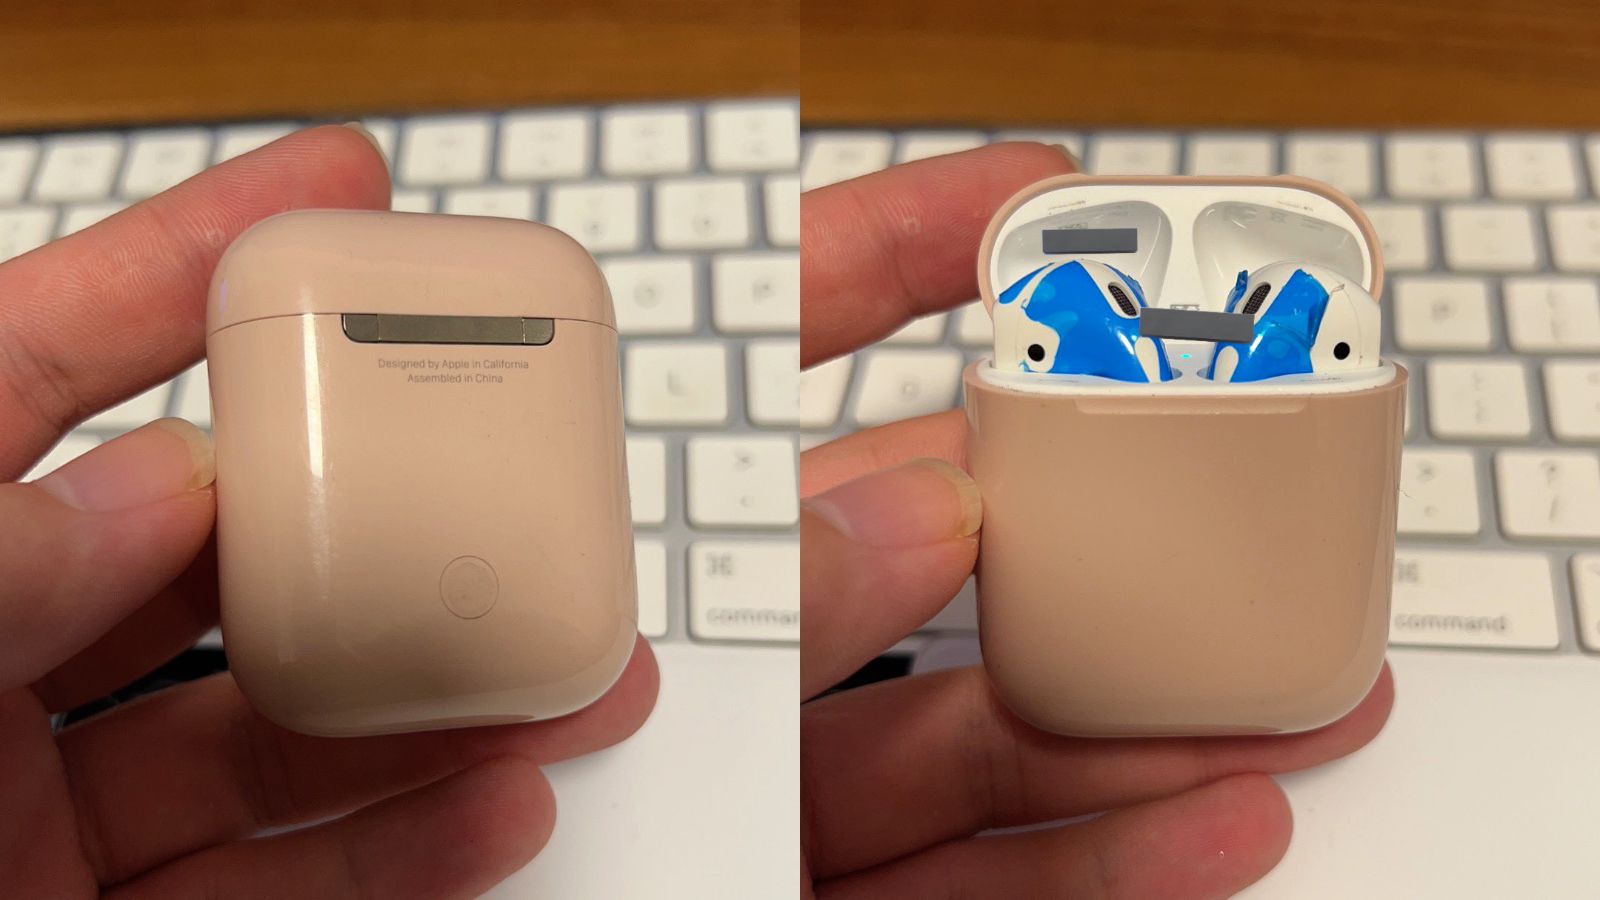 photo of Apple Prototyped AirPods in Five Different Color Options to Match iPhone 7 image